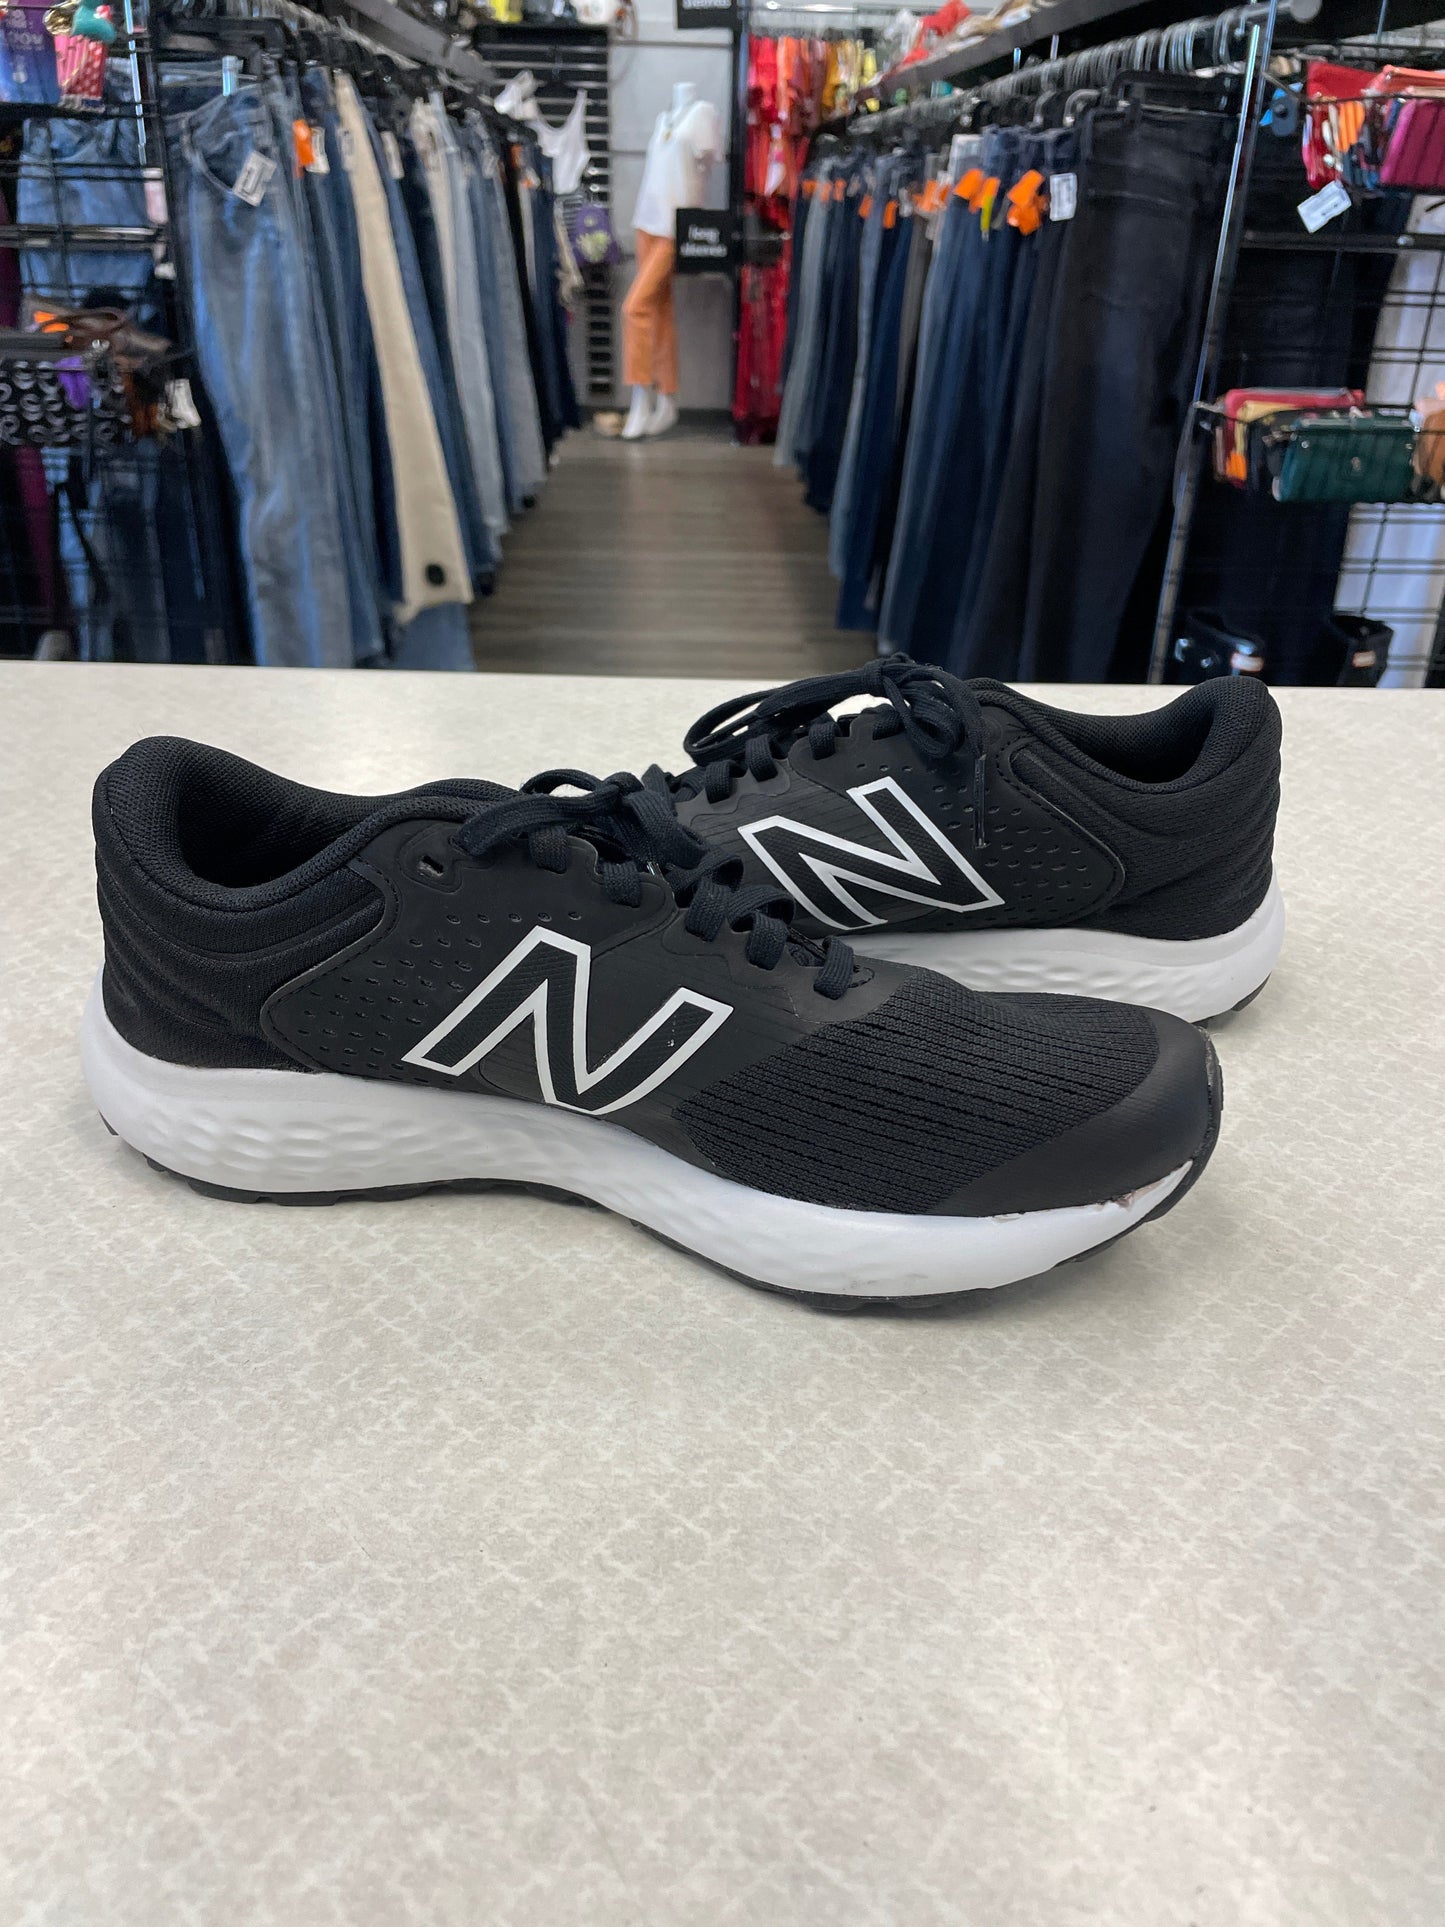 Shoes Athletic By New Balance  Size: 6.5